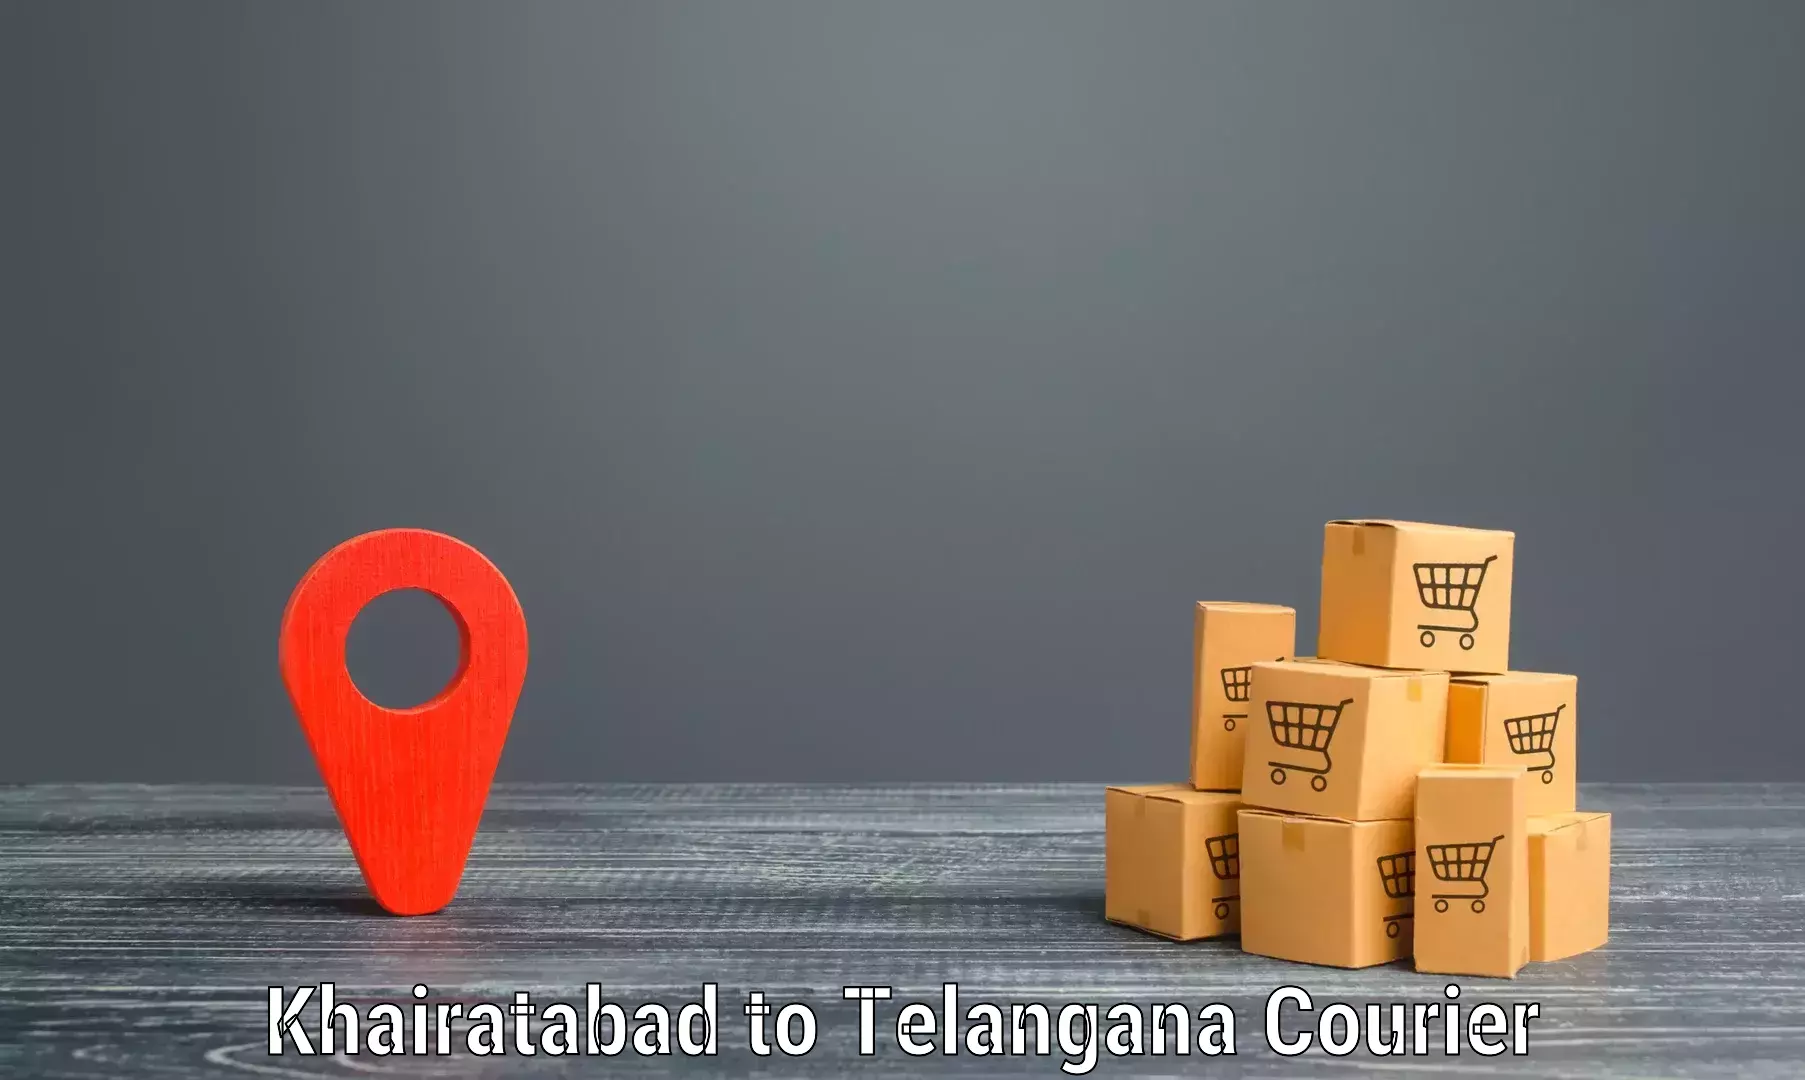 Global courier networks Khairatabad to Cheyyur